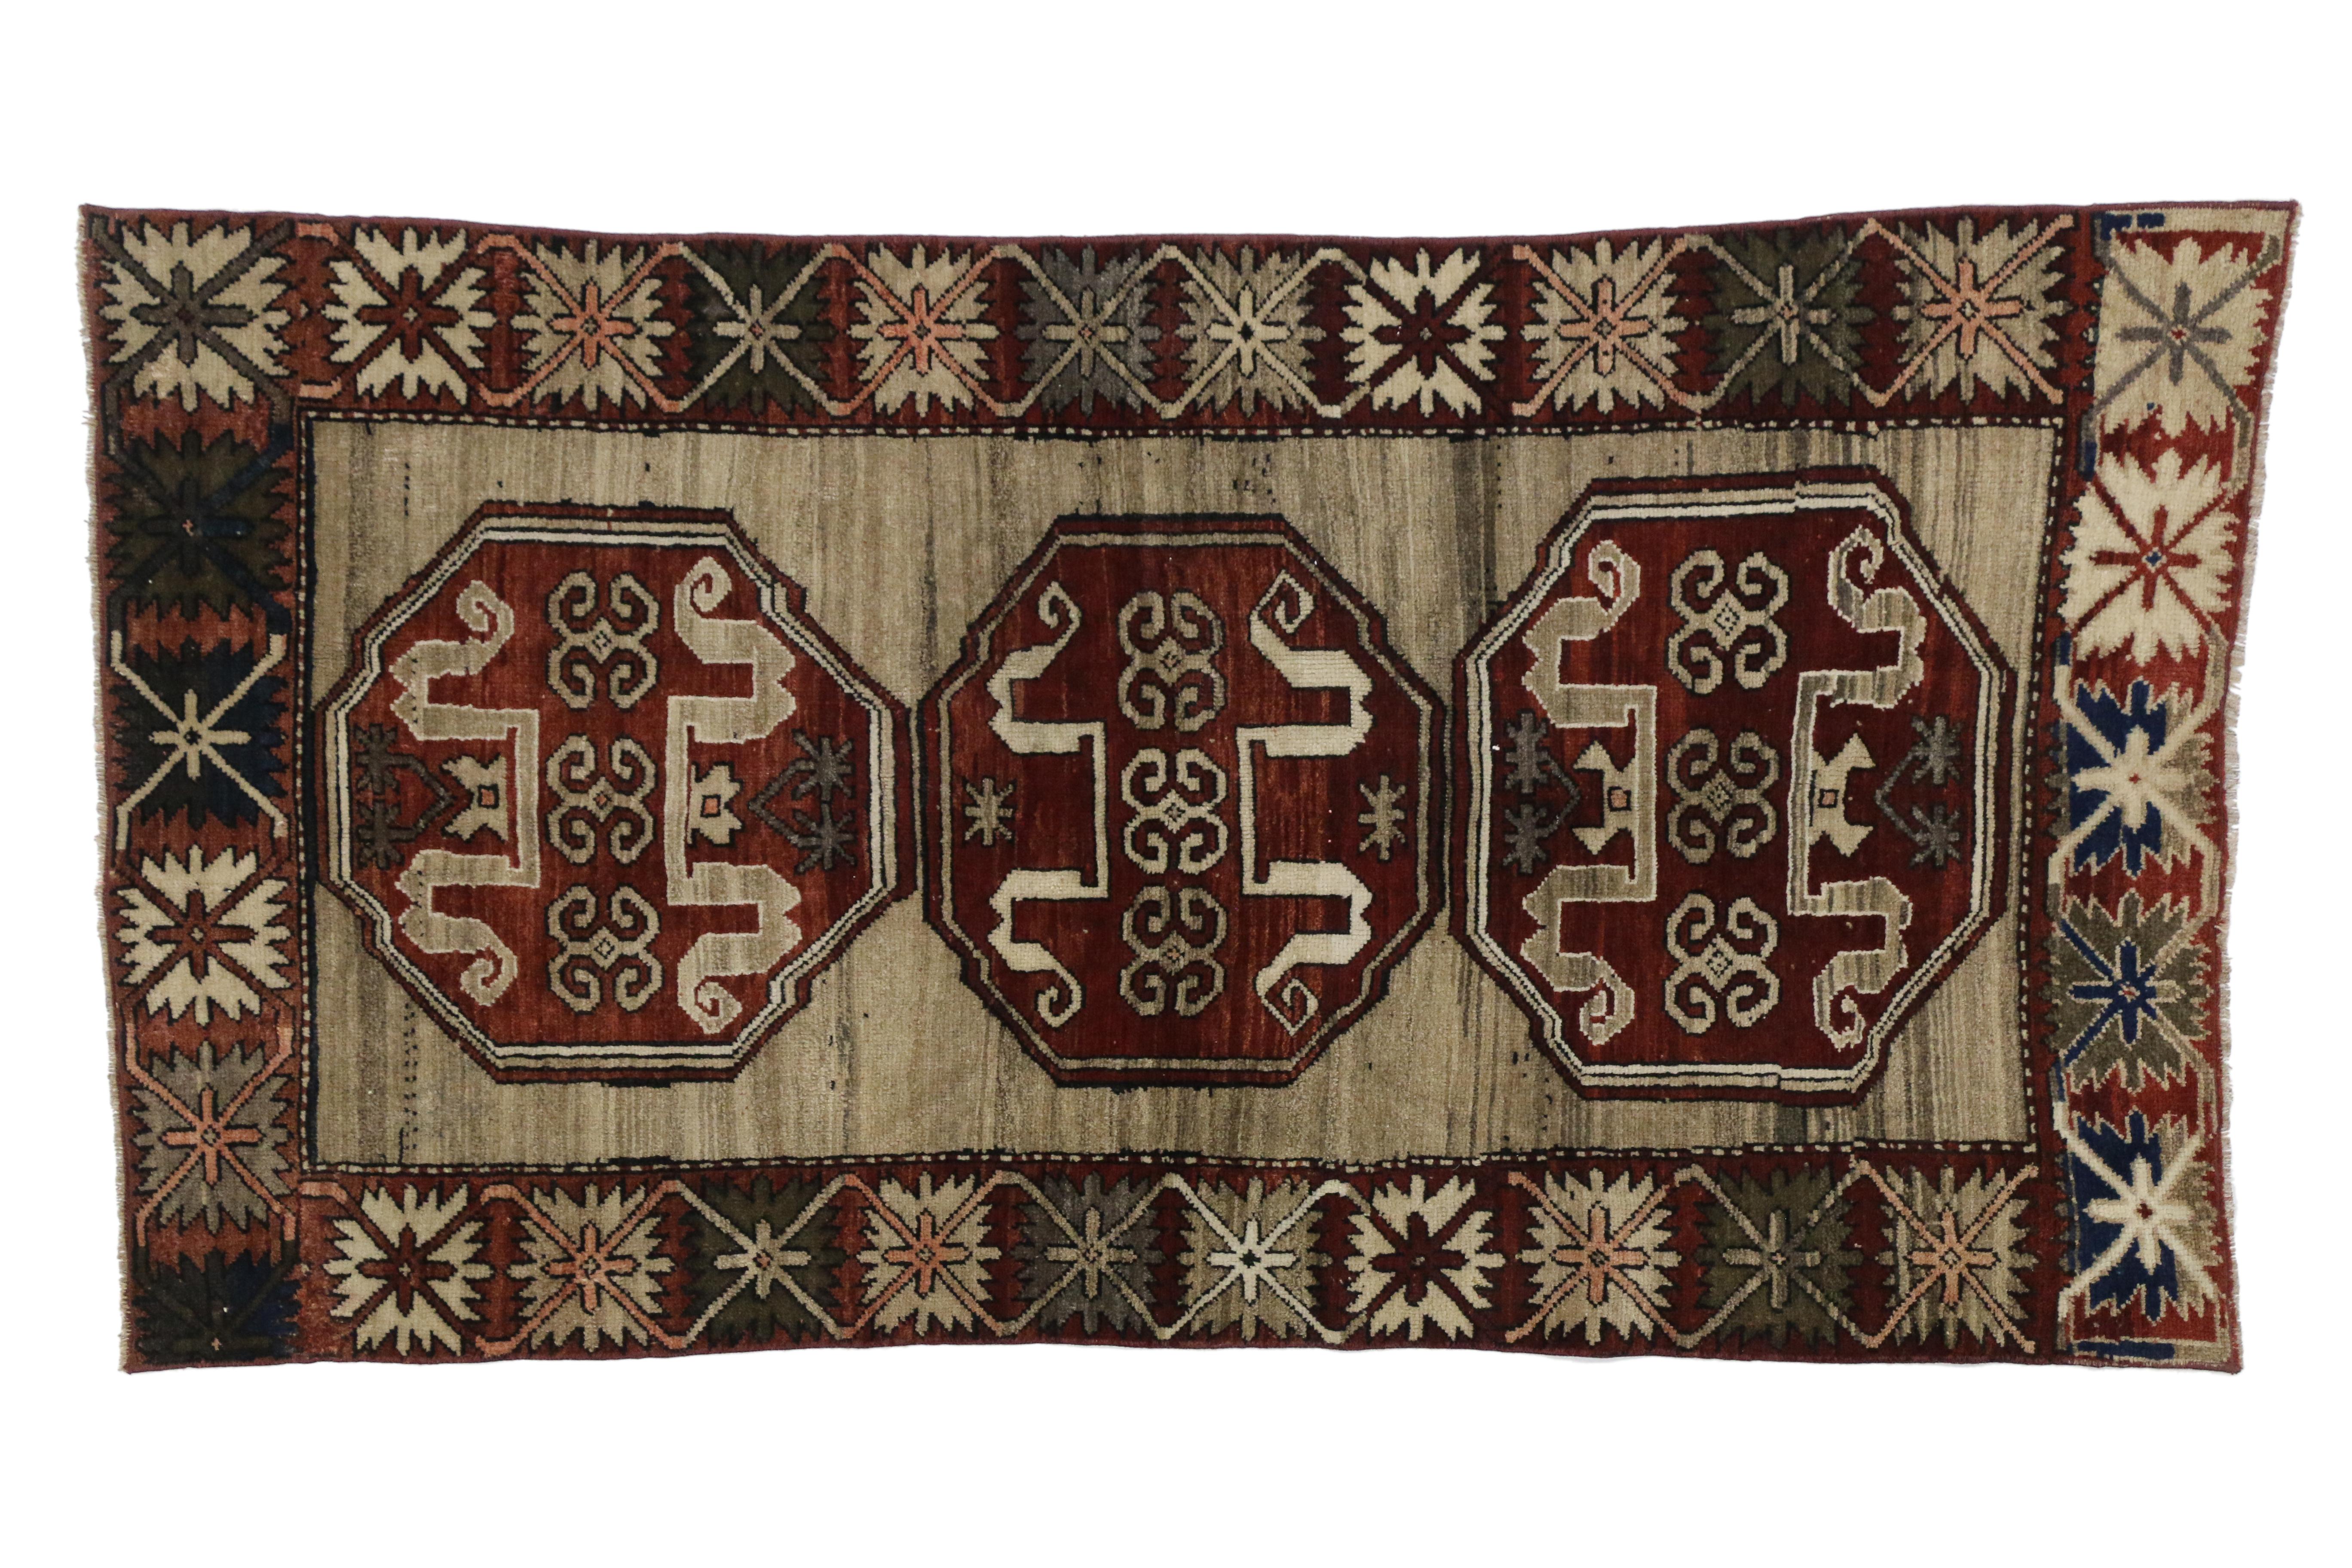 Vintage Turkish Oushak Accent Rug with Rustic Lodge Tribal Style In Good Condition For Sale In Dallas, TX